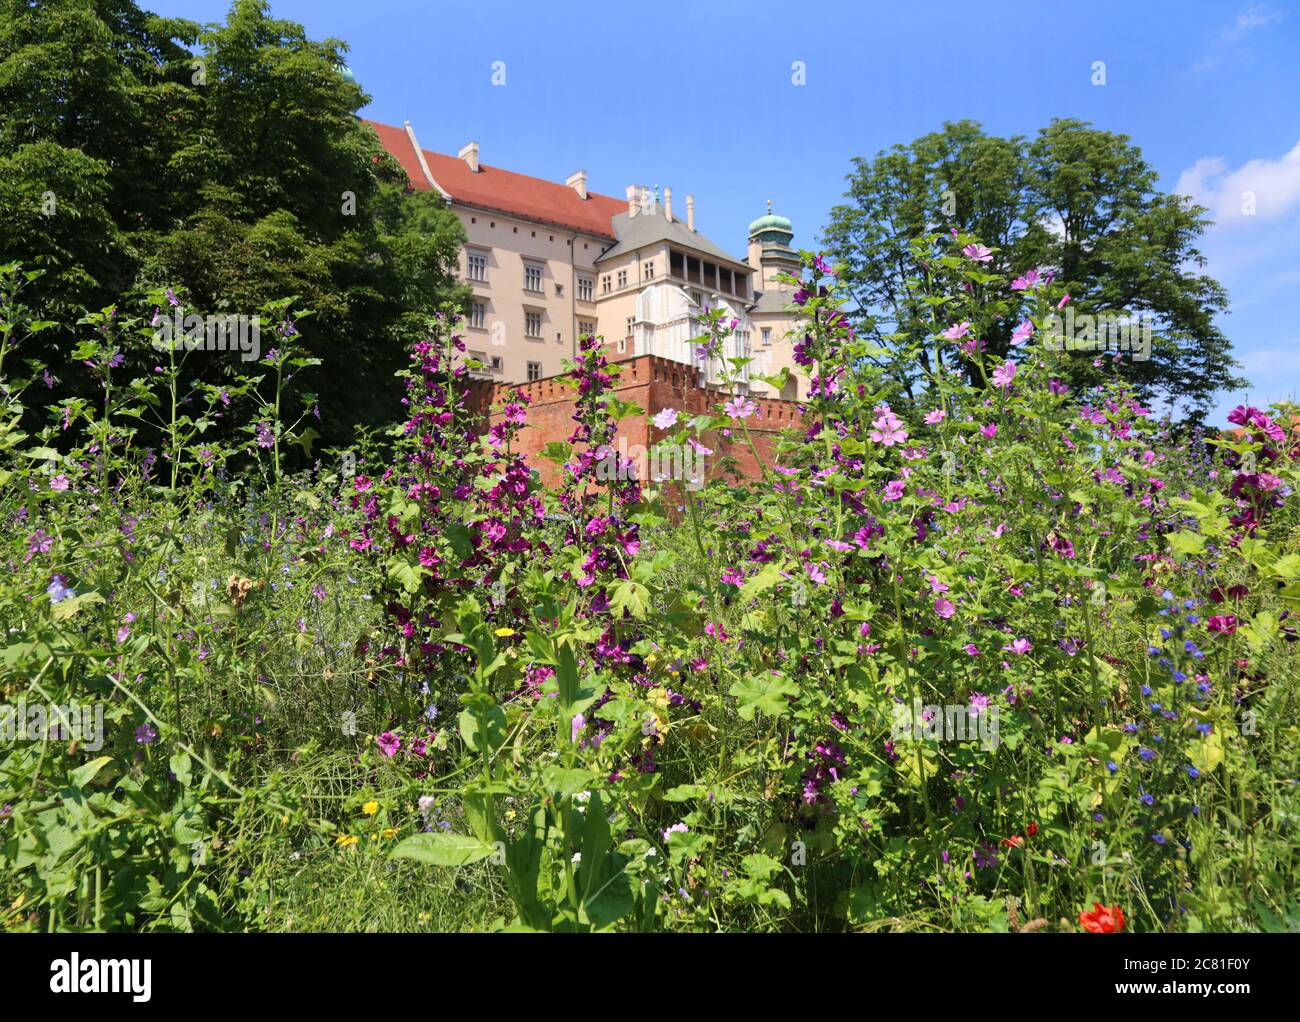 Cracow. Krakow. Poland. Wild flower meadow lawn in front of Wawel royal castle. Stock Photo